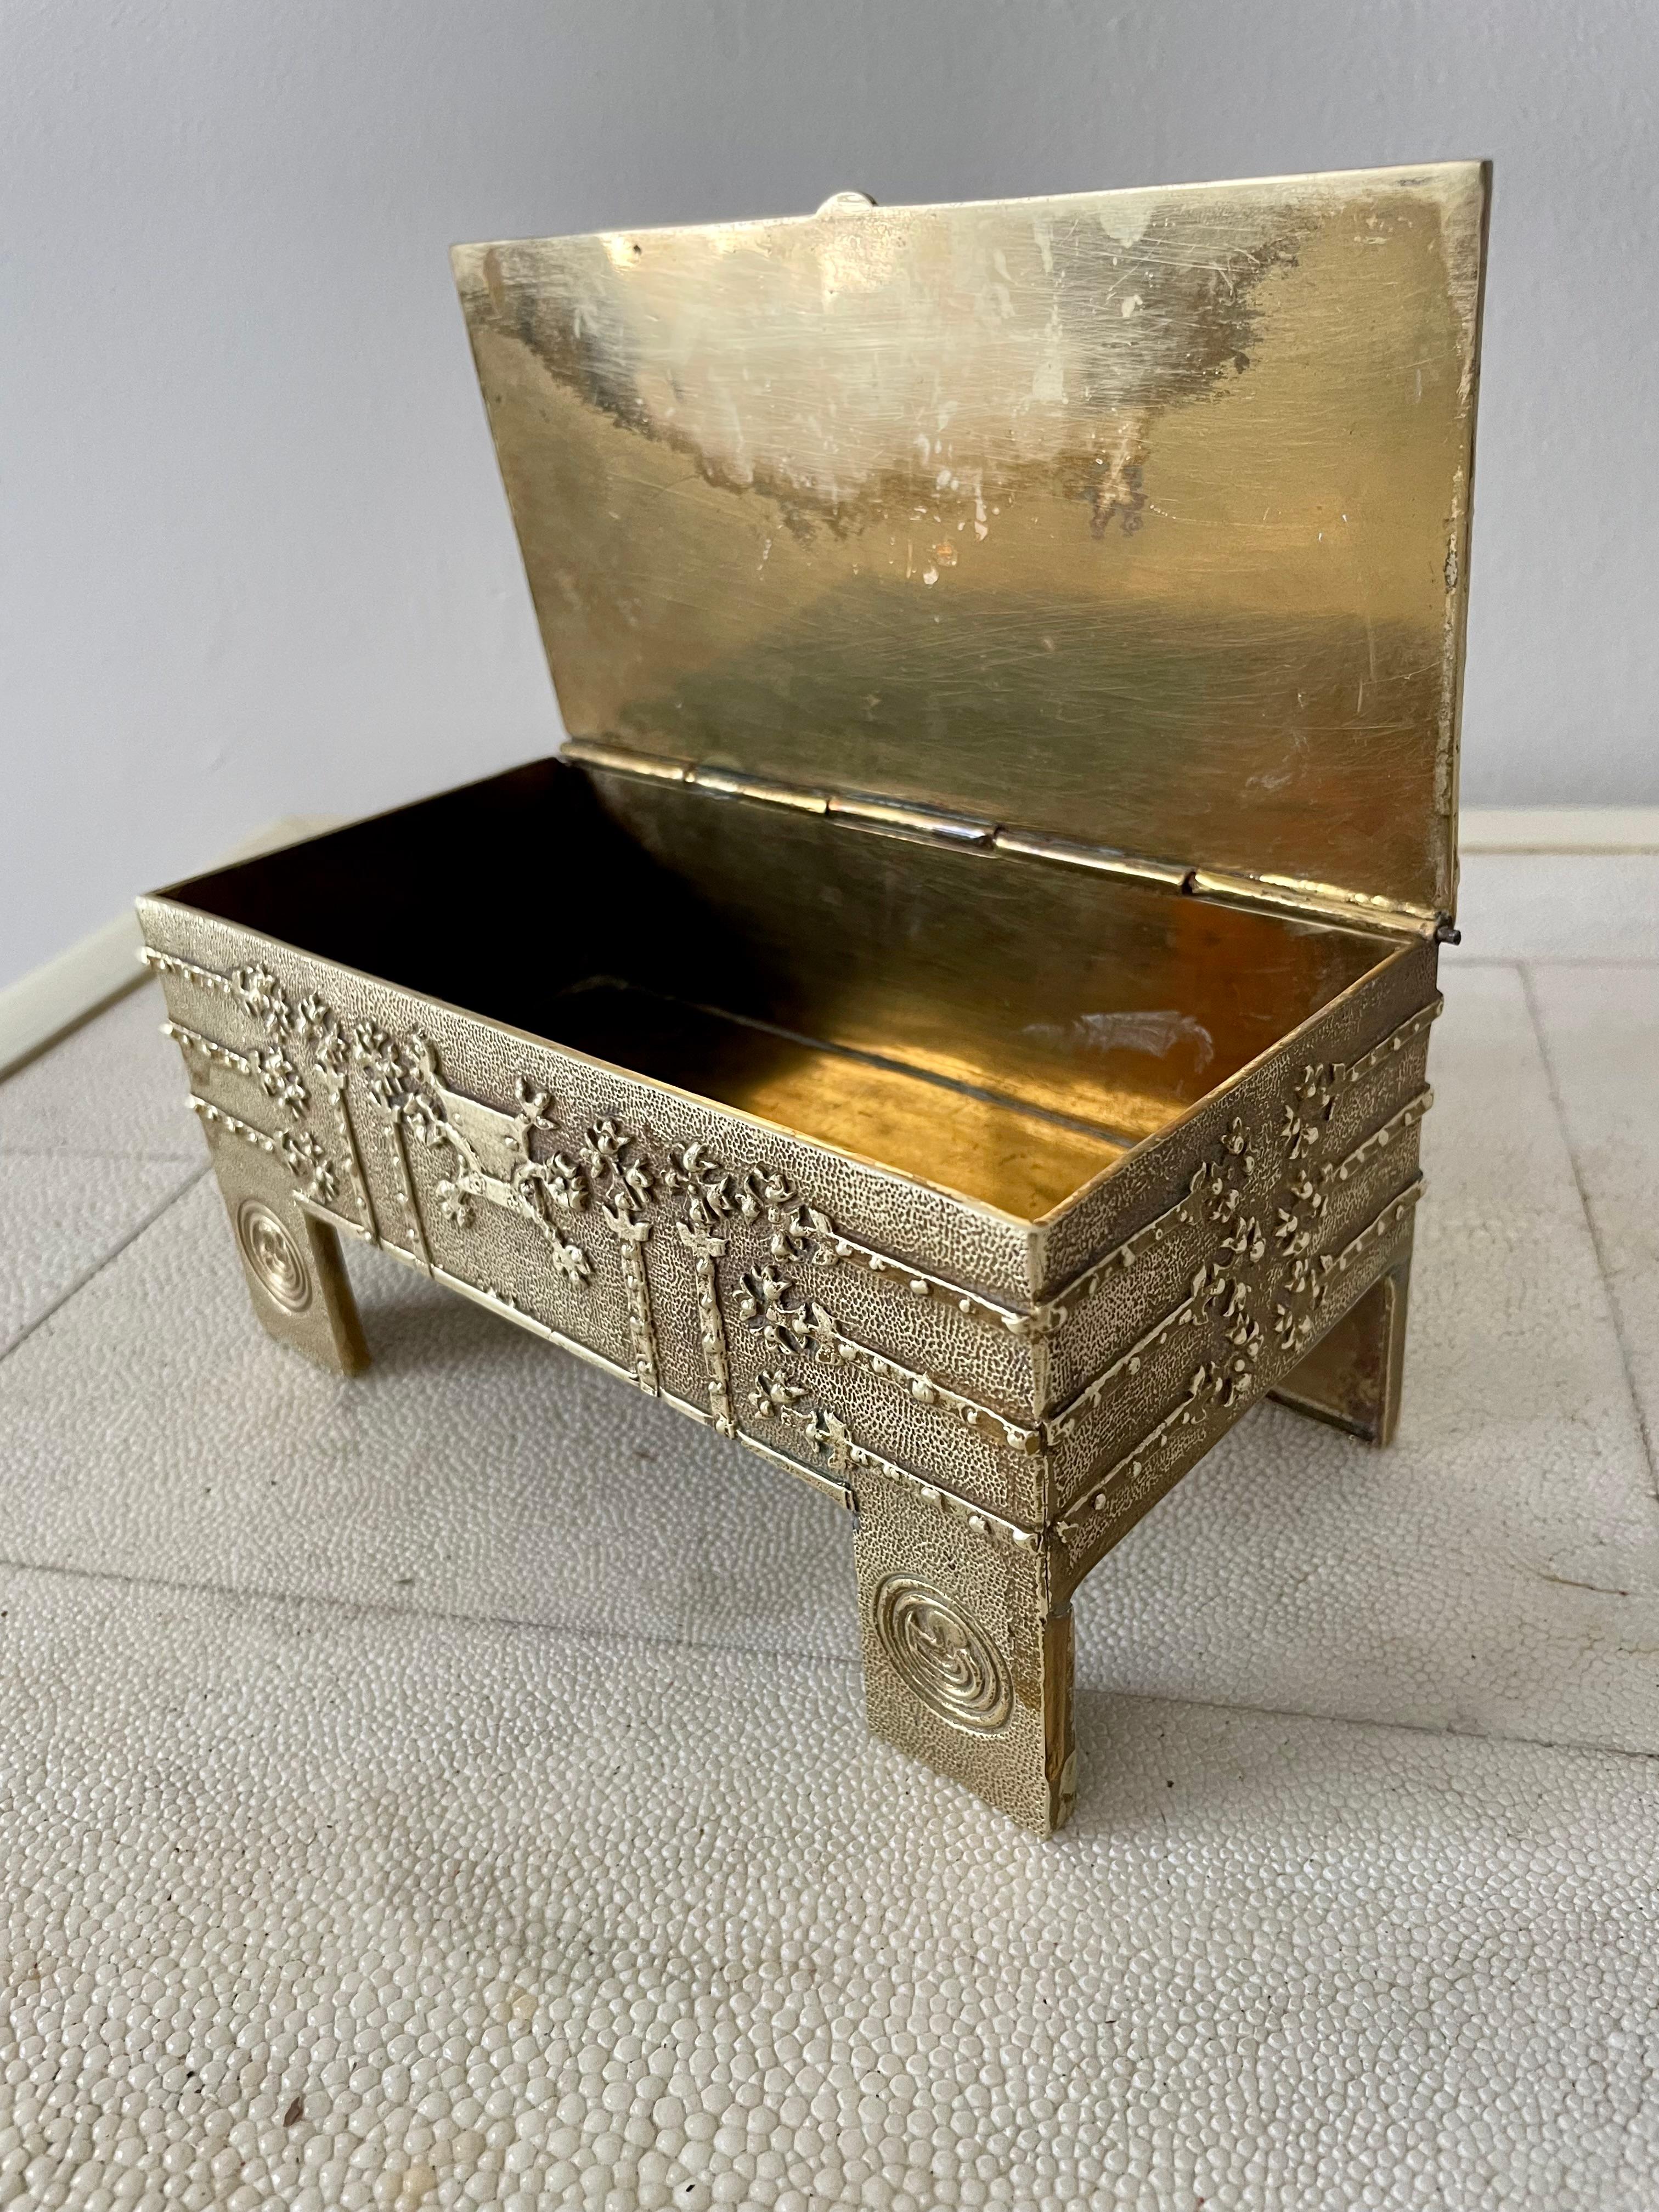 Brutalist Hammered Brass Box or Jewelry Casket For Sale 4